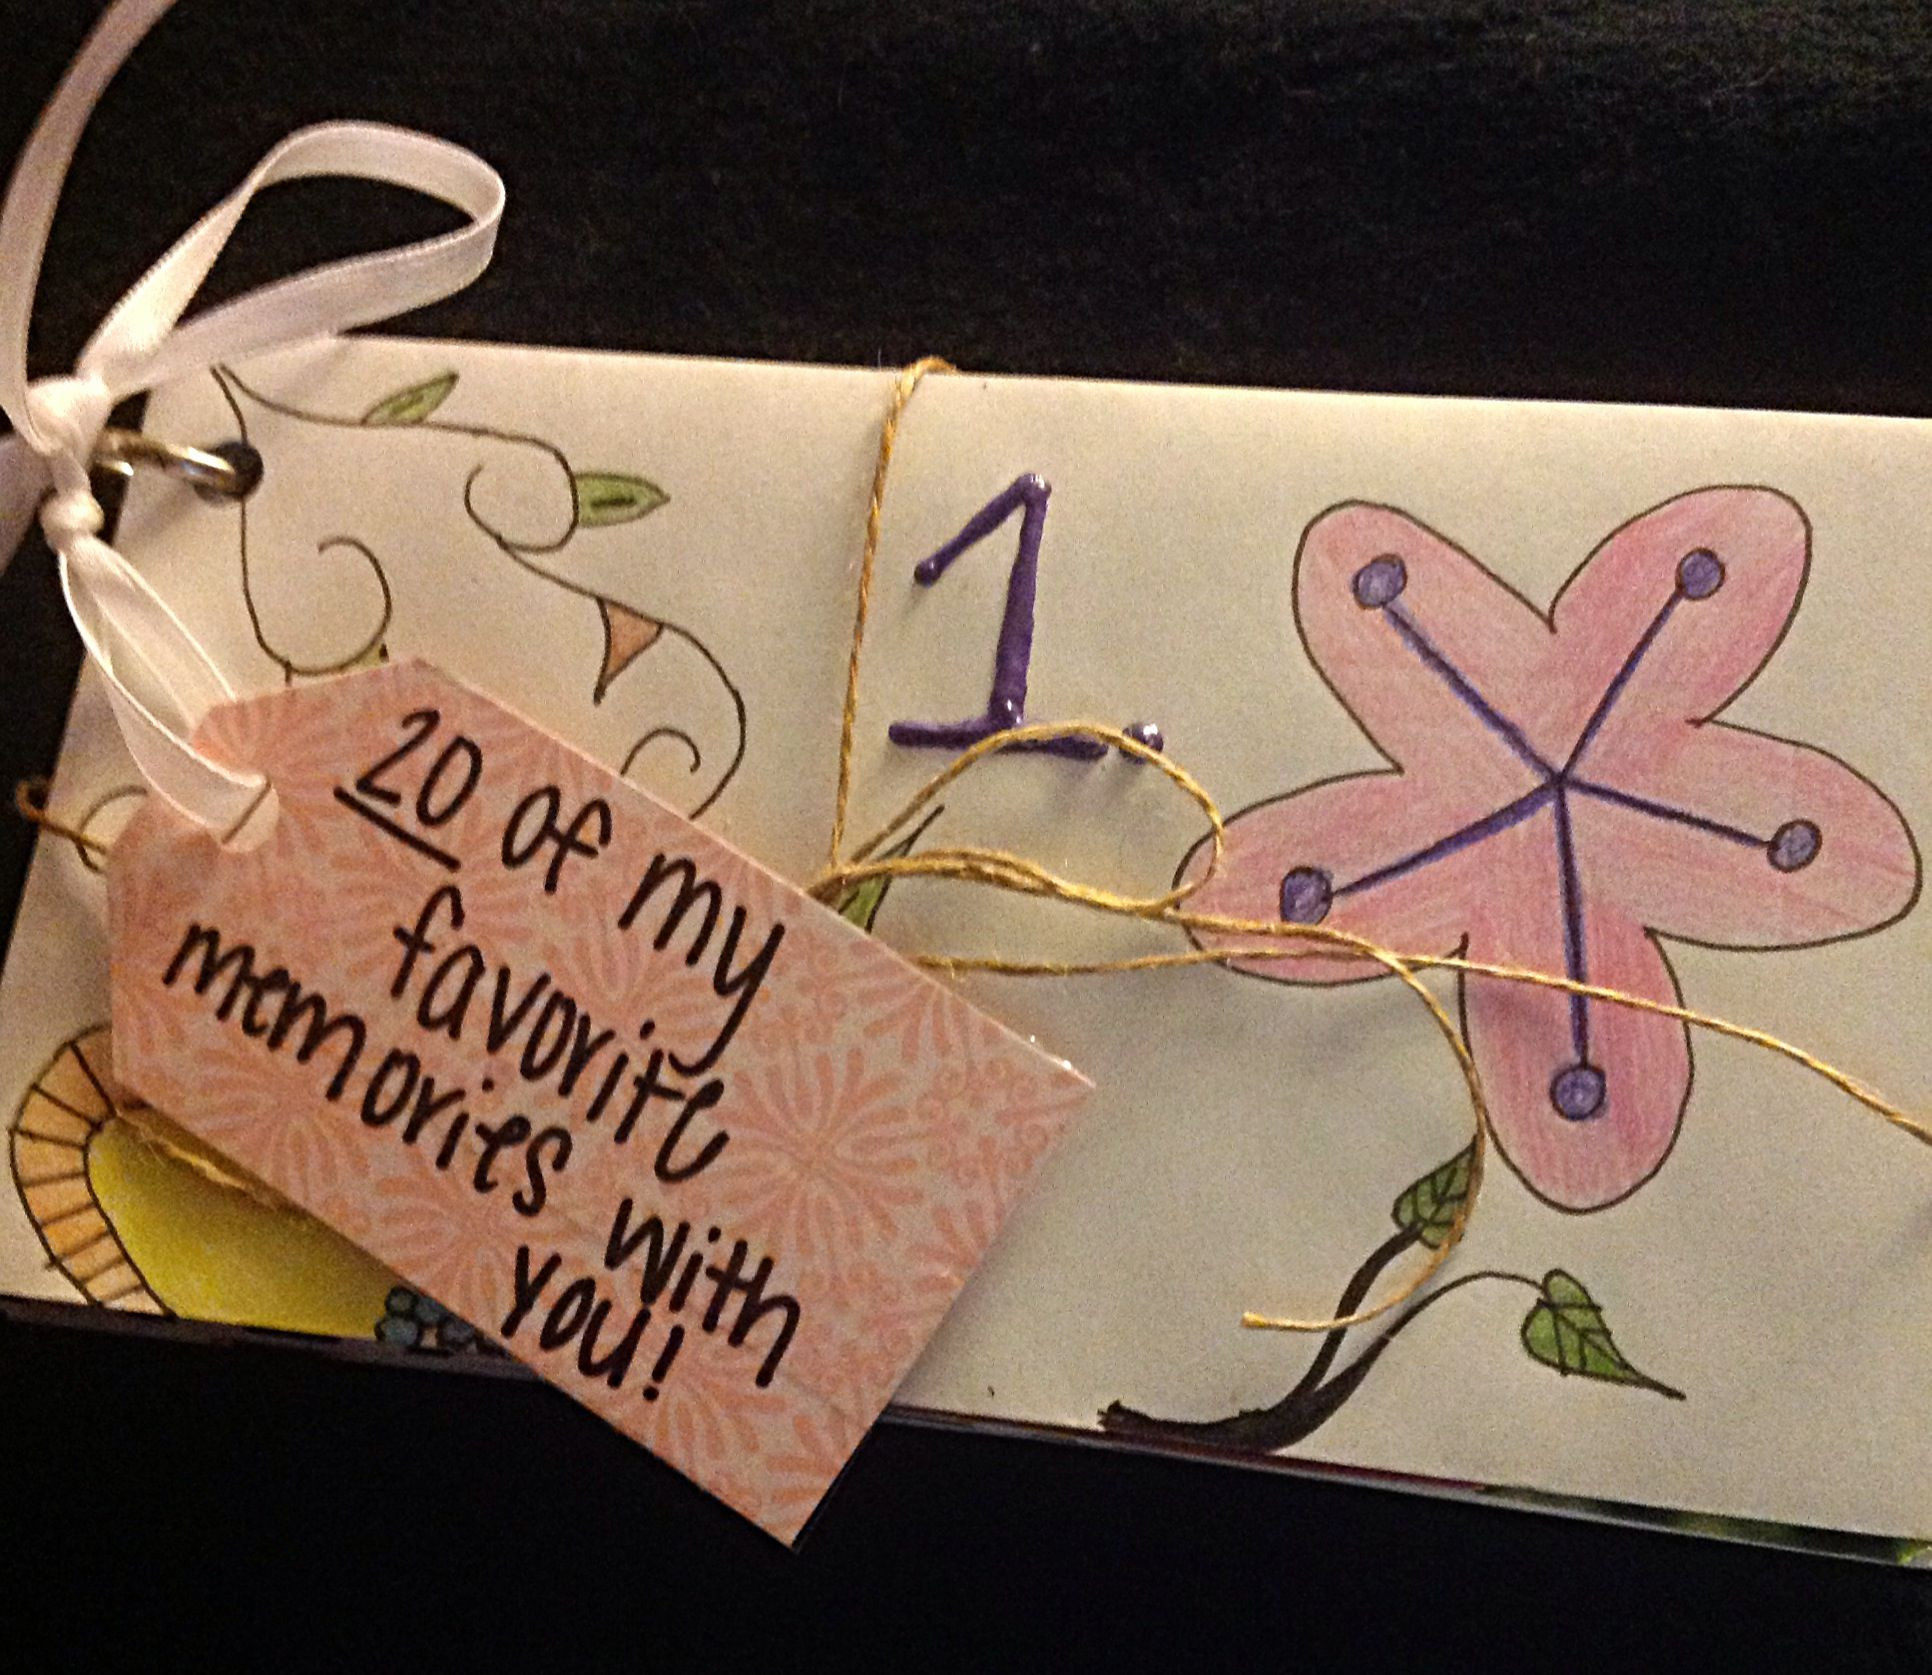 20th Birthday Party Ideas For Her
 I wrote 20 of my favorite memories with my friend for her